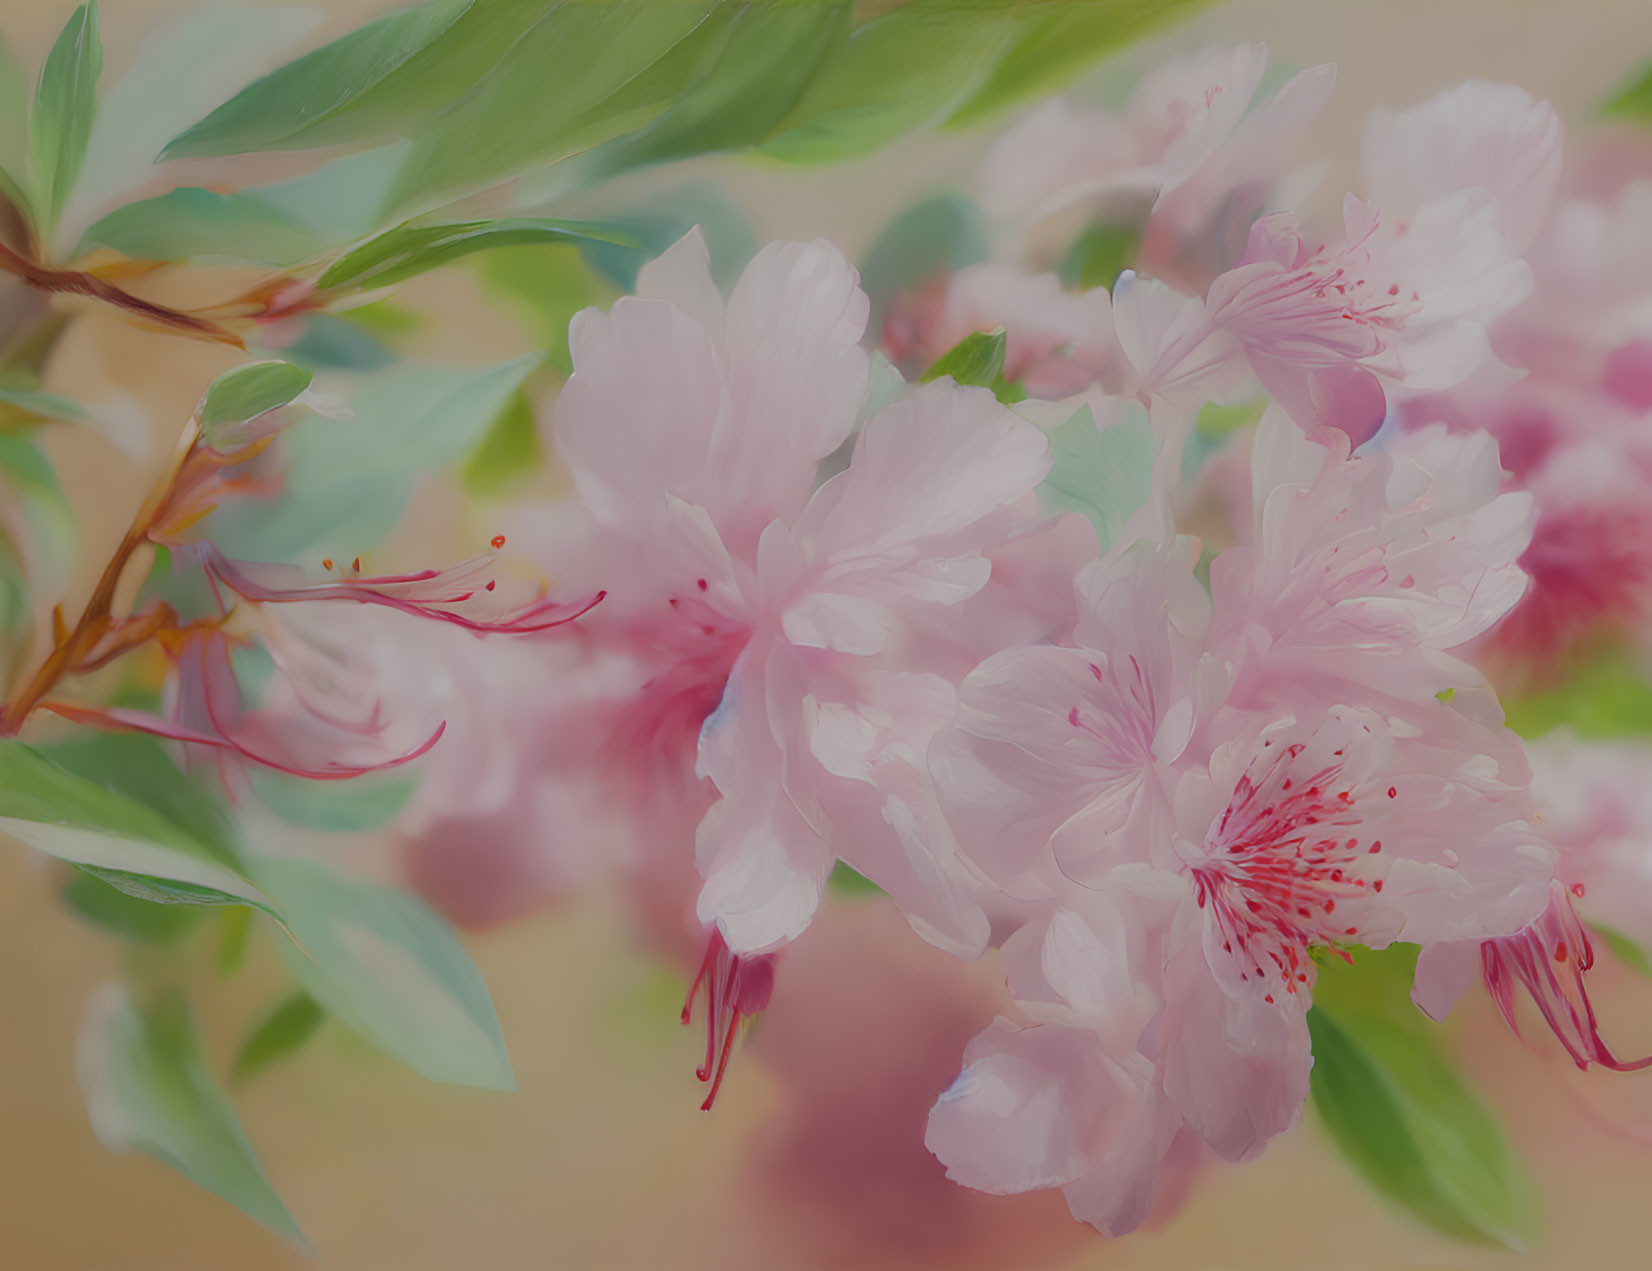 Delicate pink cherry blossoms in soft focus